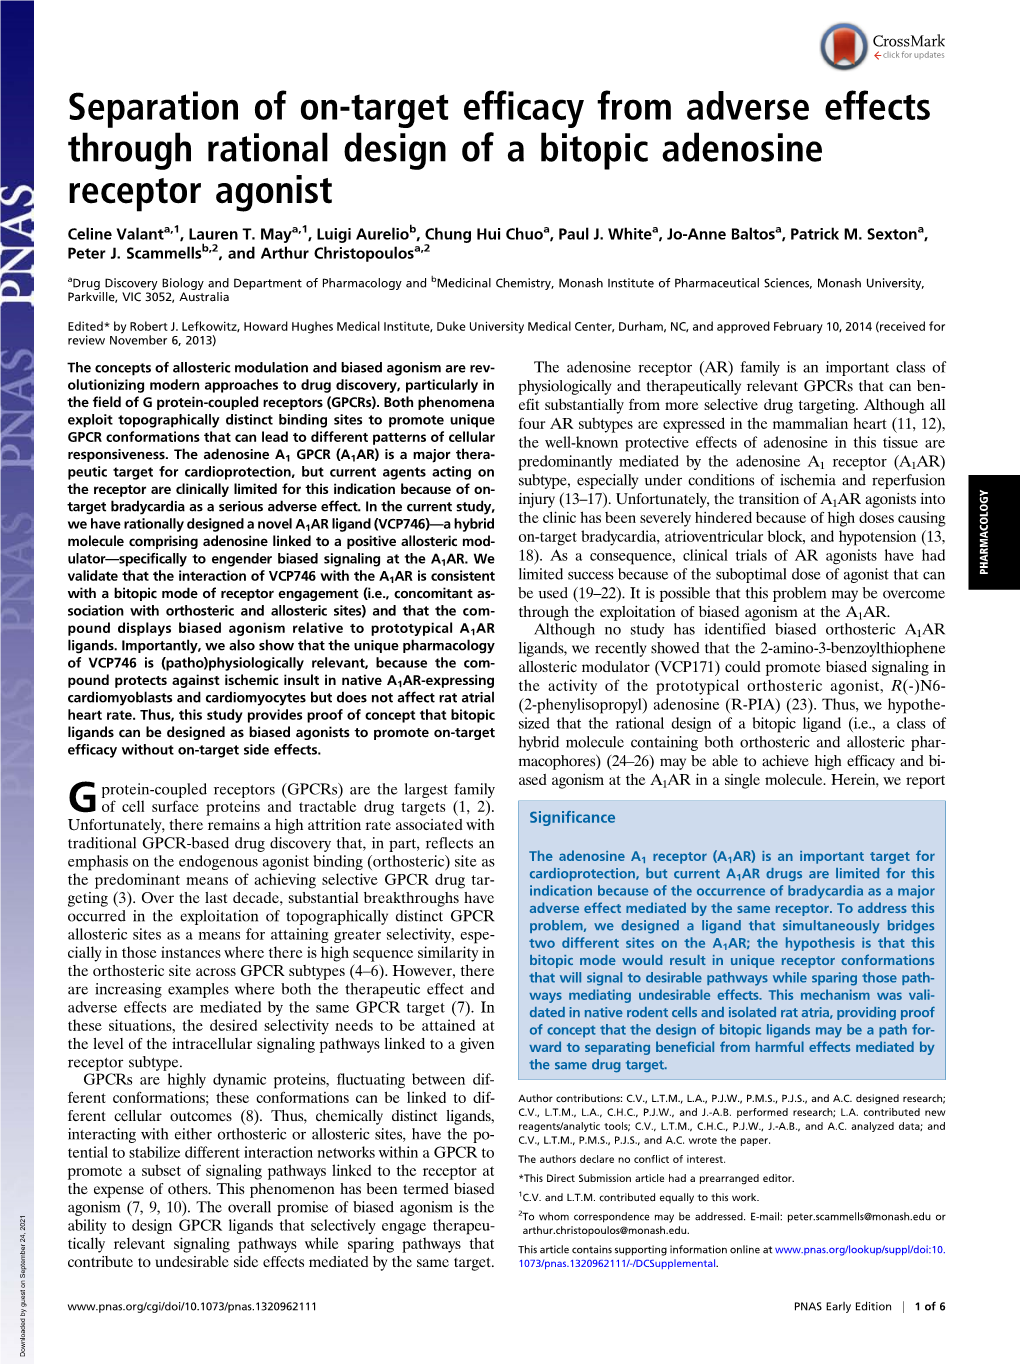 Separation of On-Target Efficacy from Adverse Effects Through Rational Design of a Bitopic Adenosine Receptor Agonist